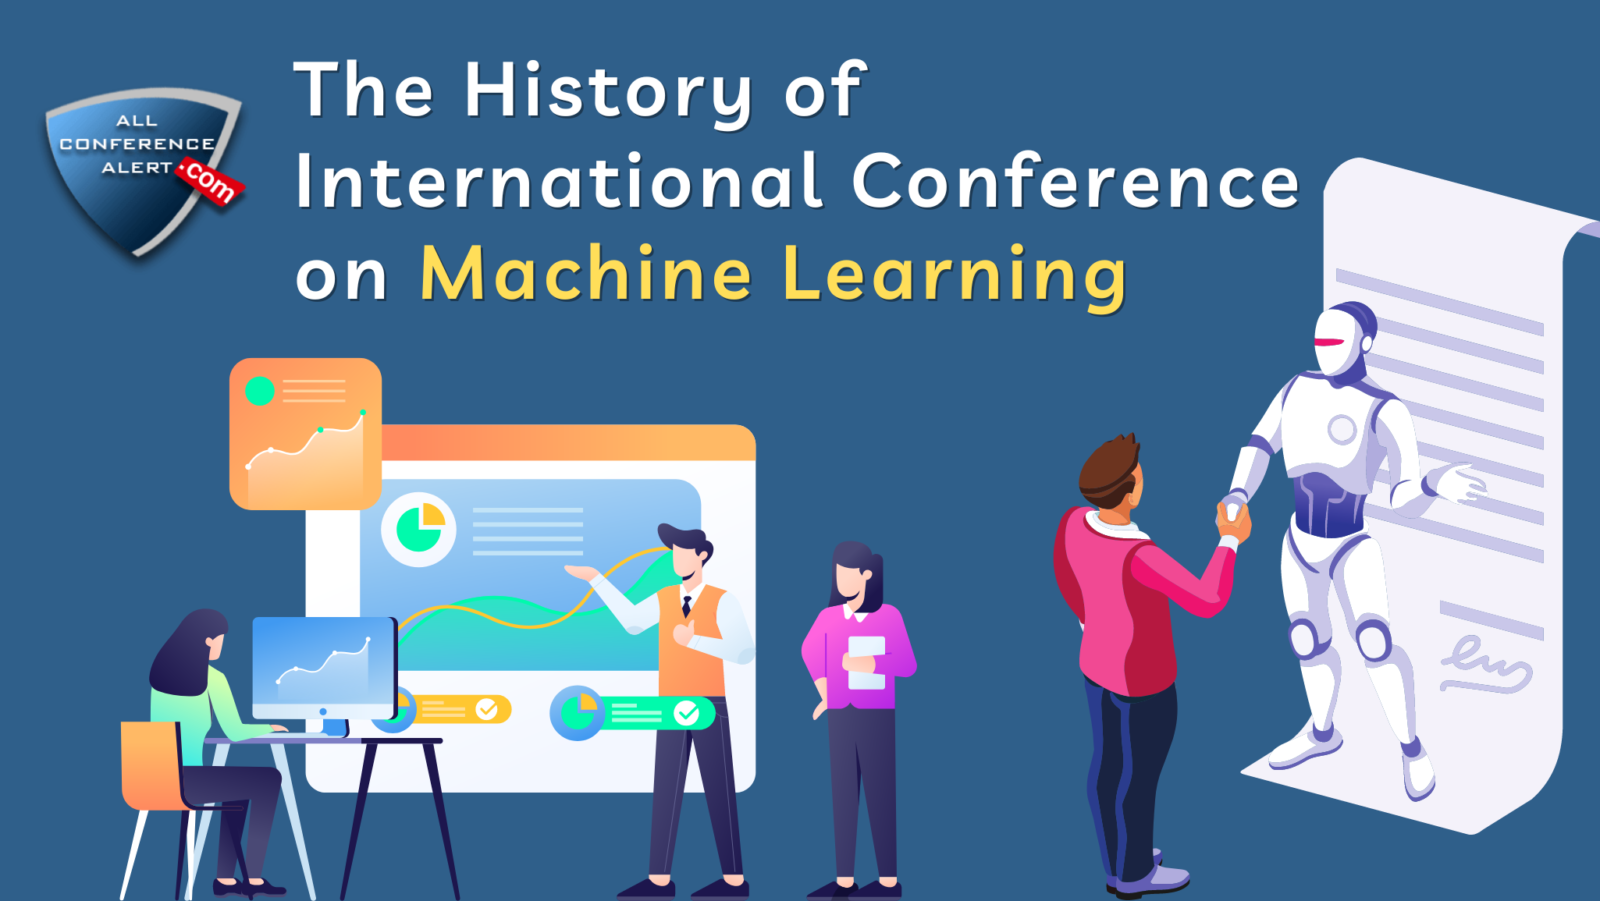 The History of International Conference on Machine Learning